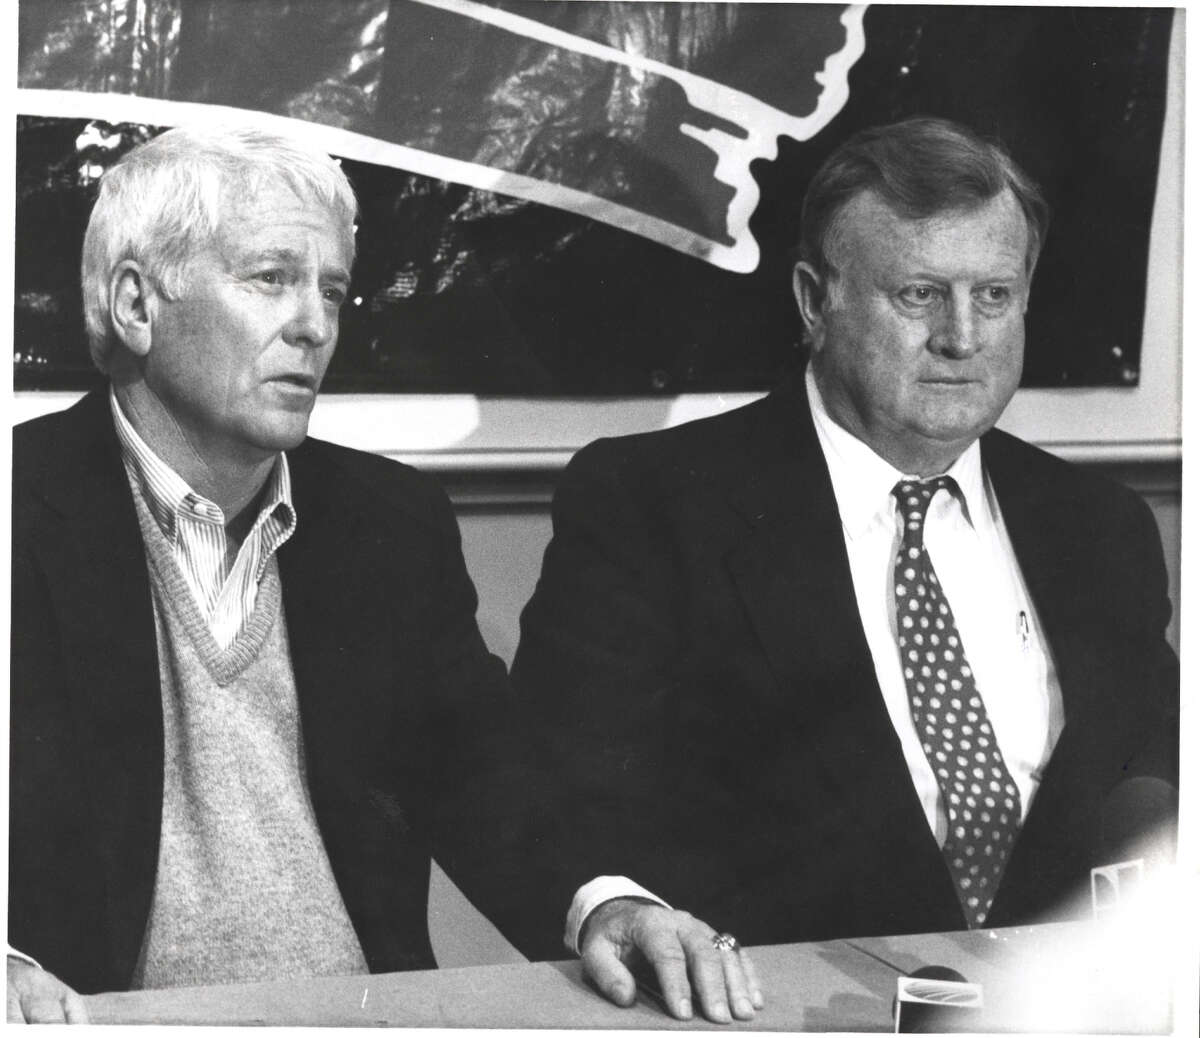 After the 1975-76 season, the Spurs’ then-owners, Red McCombs (right) and Angelo Drossos moved Bob Bass (left) to the front office.